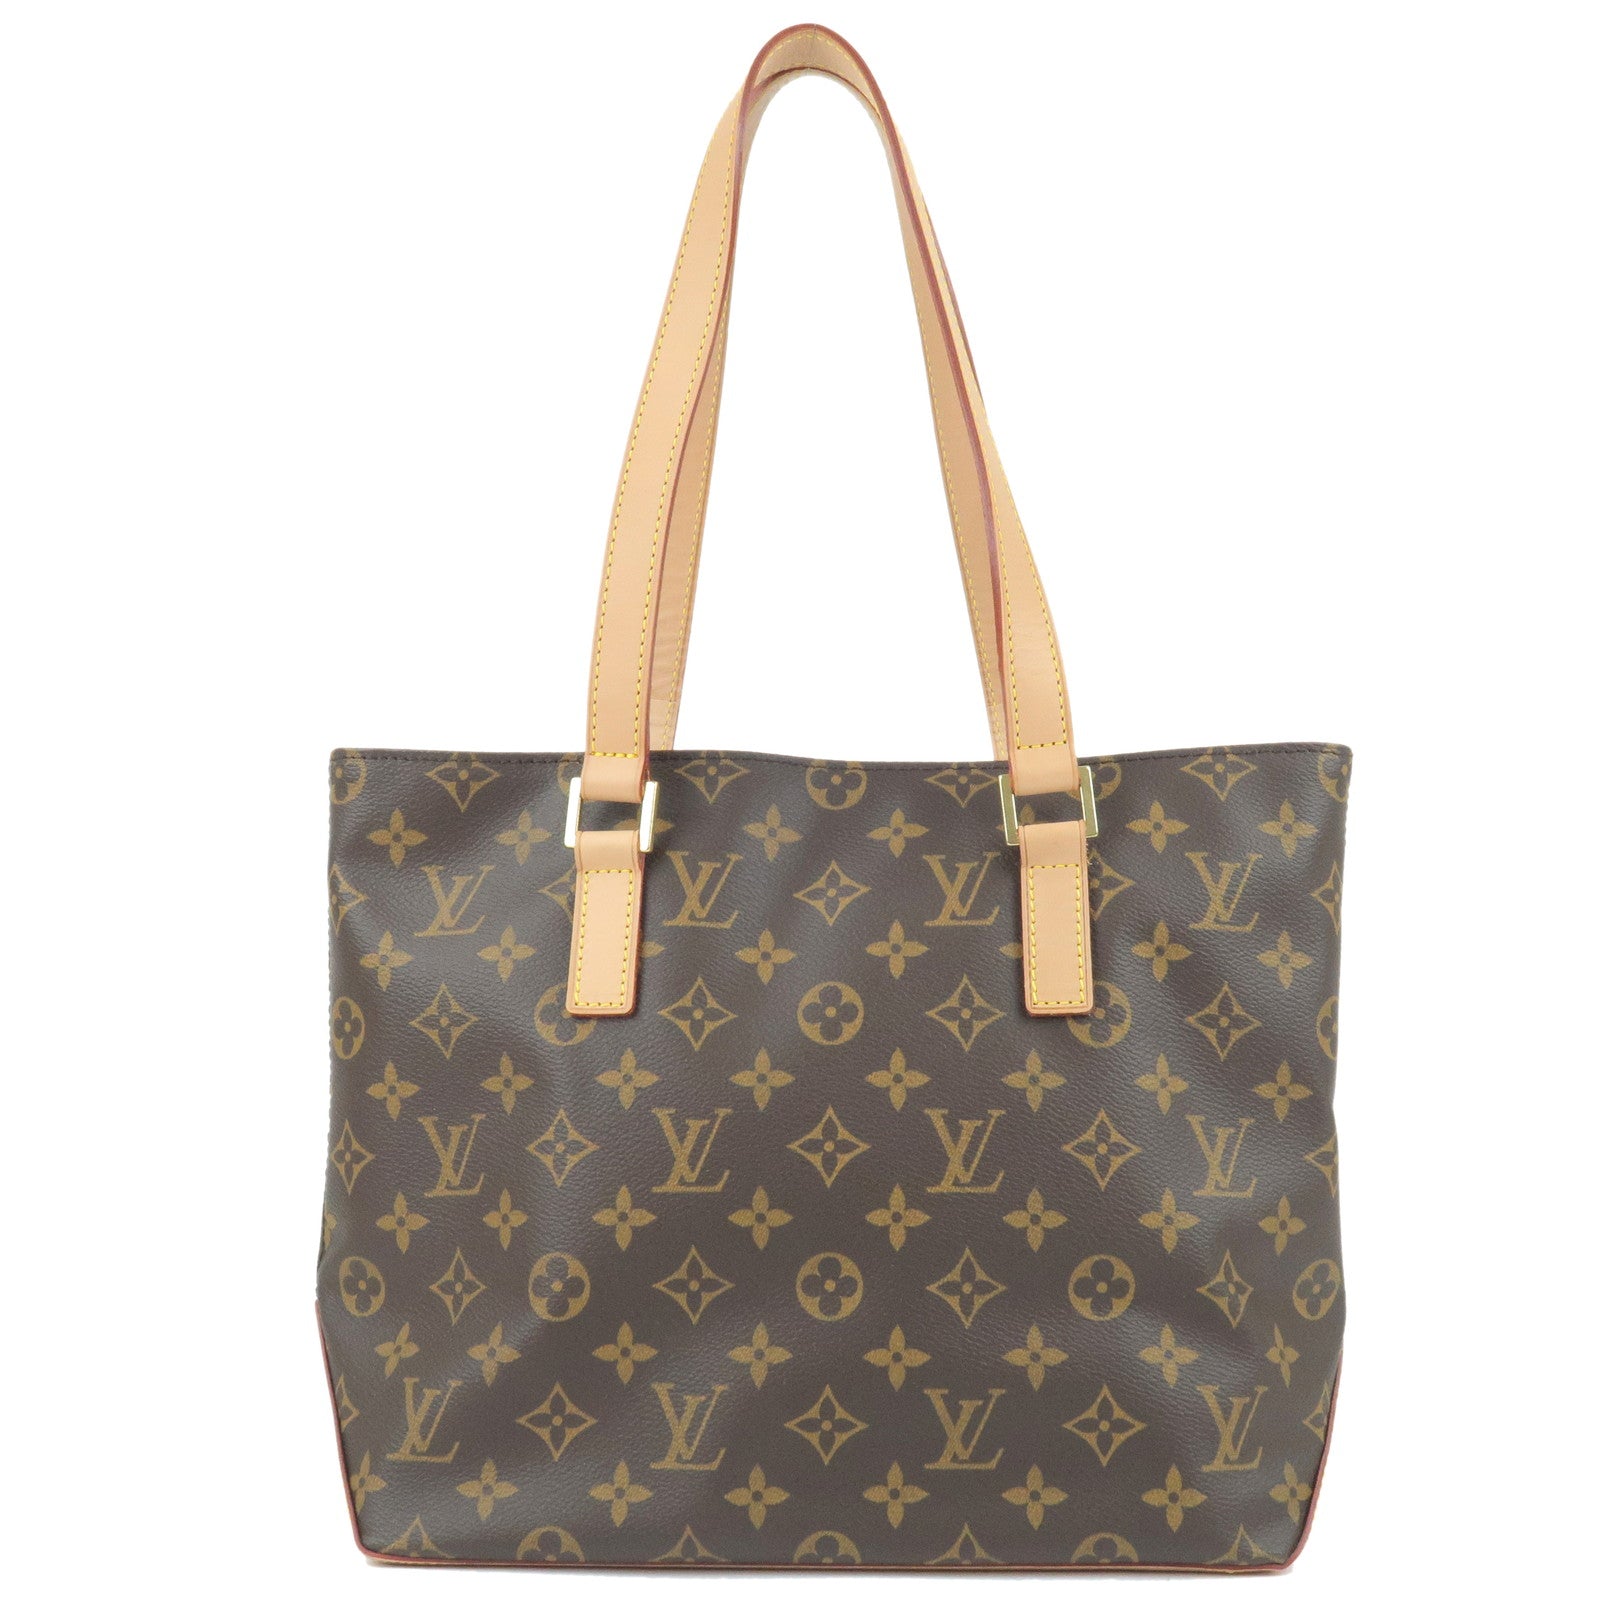 Pre-owned Louis Vuitton 2007 Saleya Pm Tote Bag In White